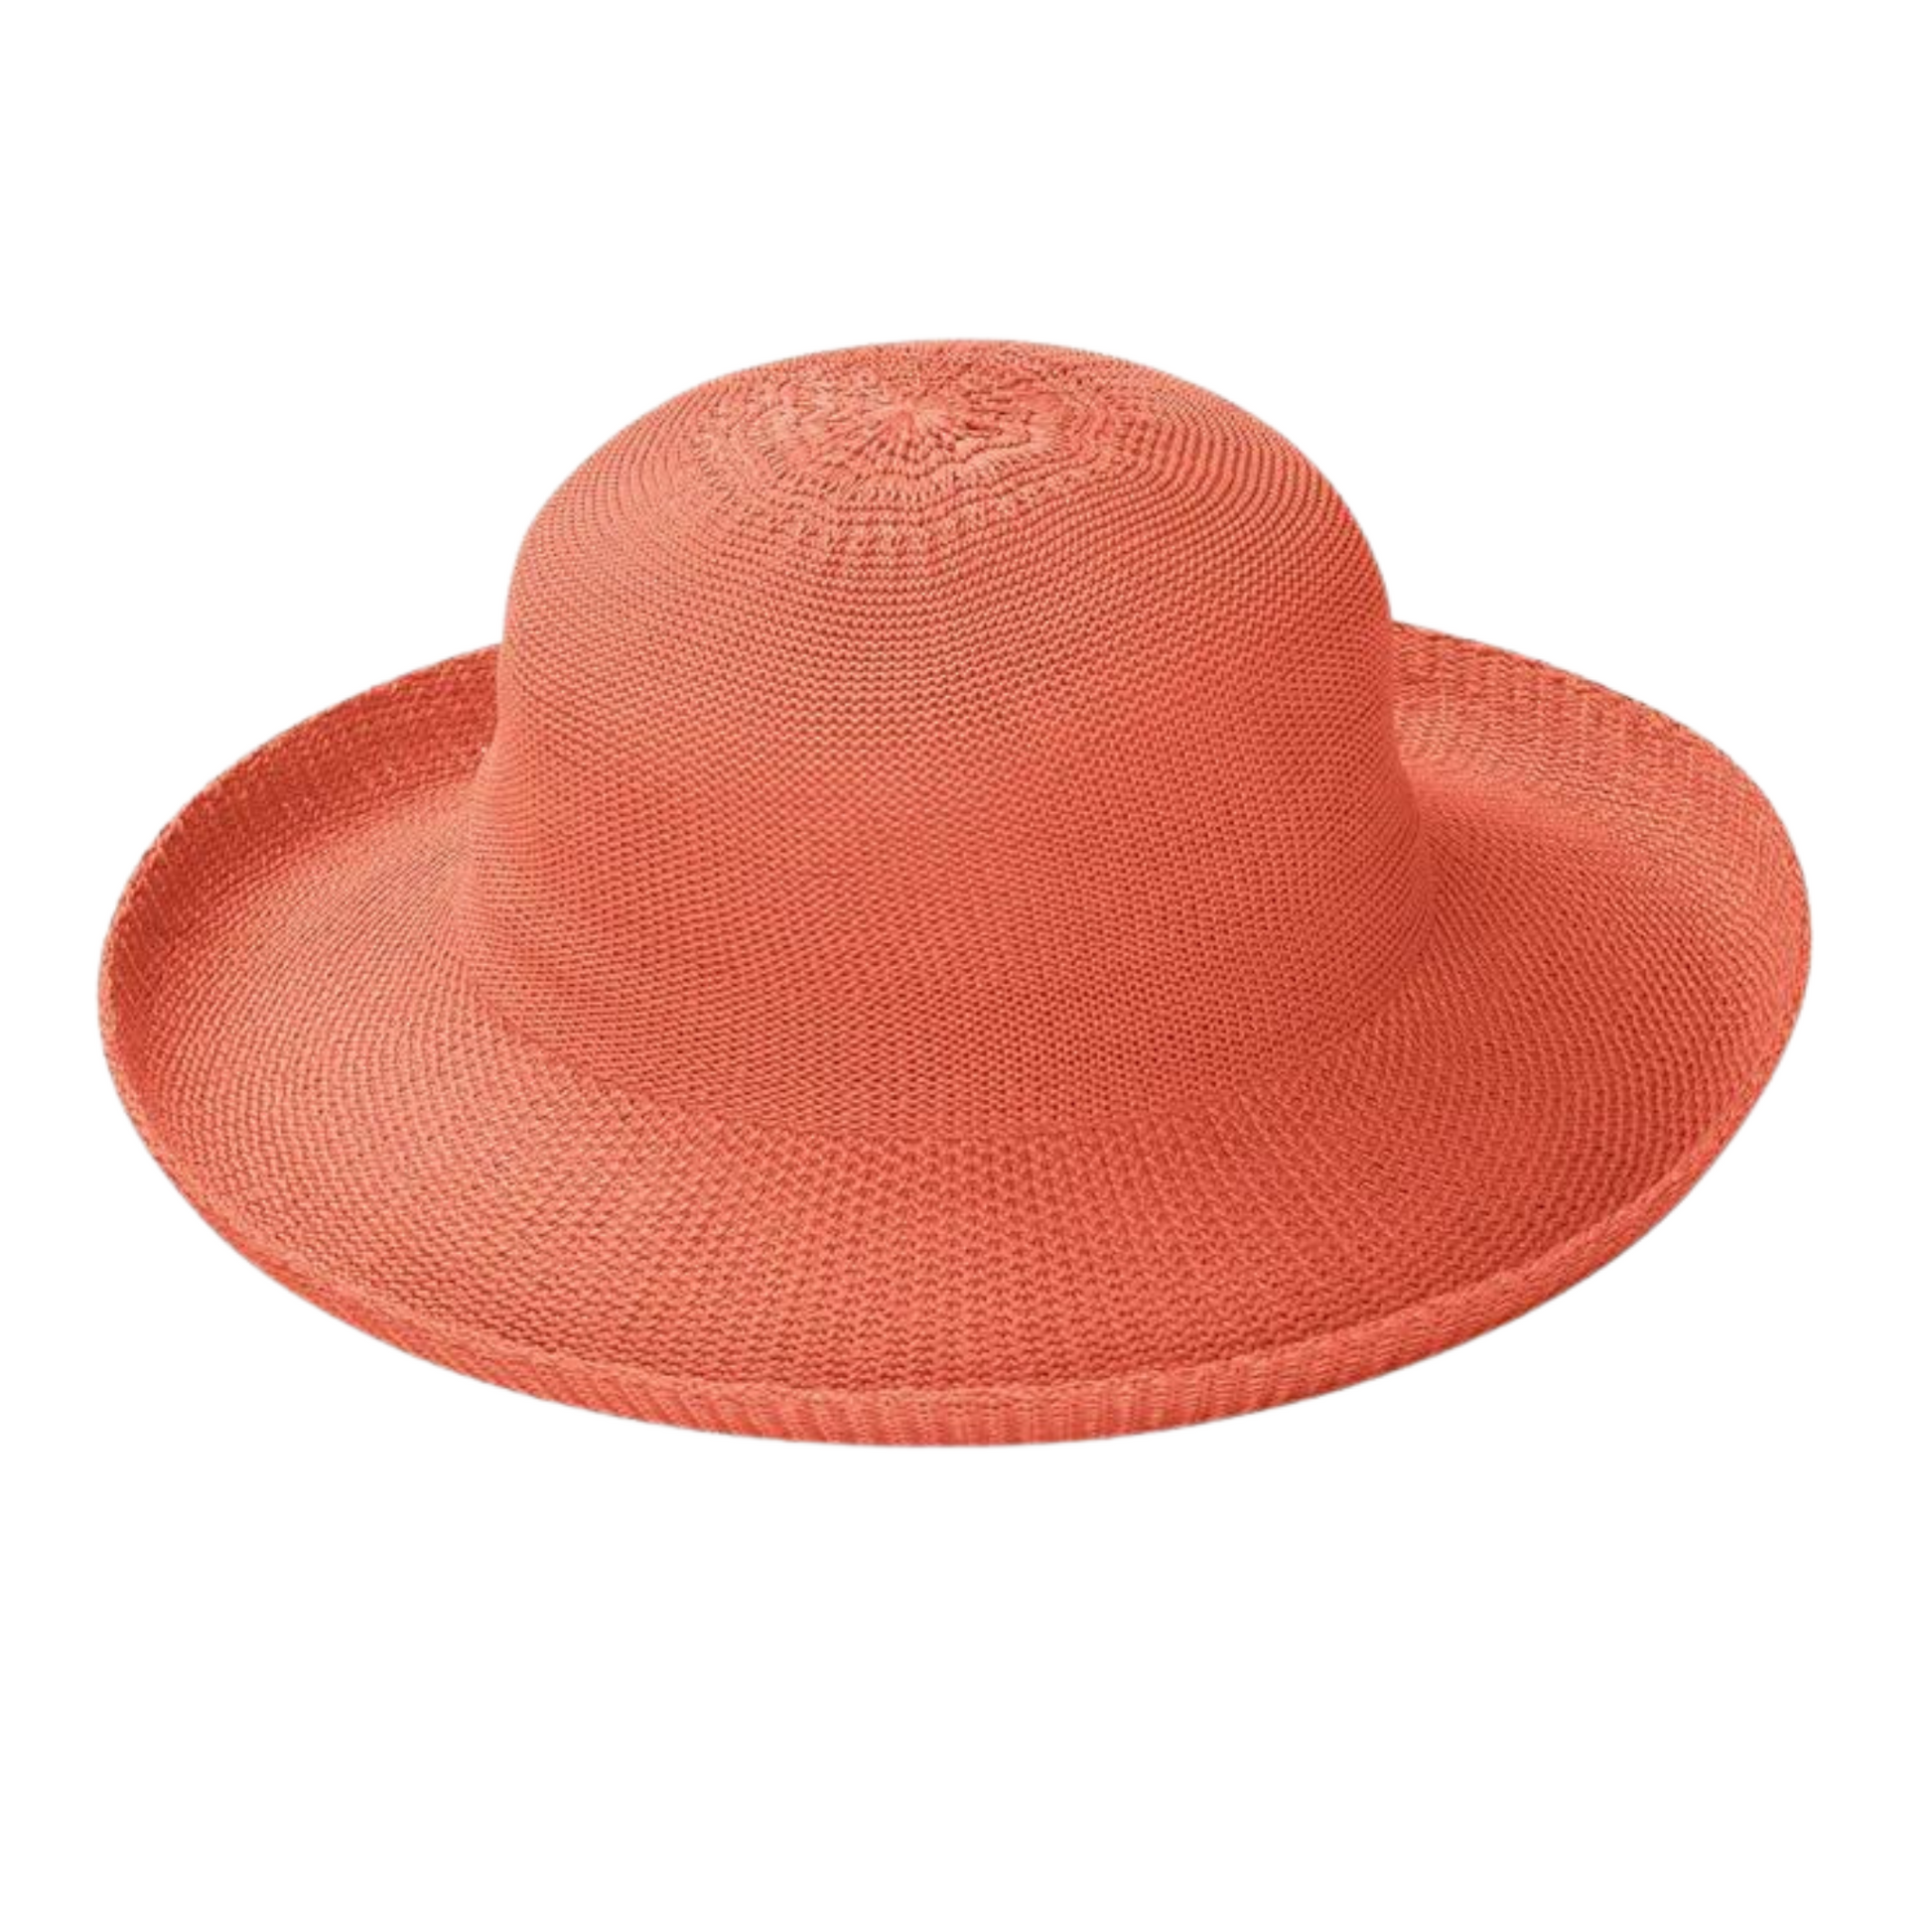 Light red-orange weaved hat with soft curvature and rolled in brim.